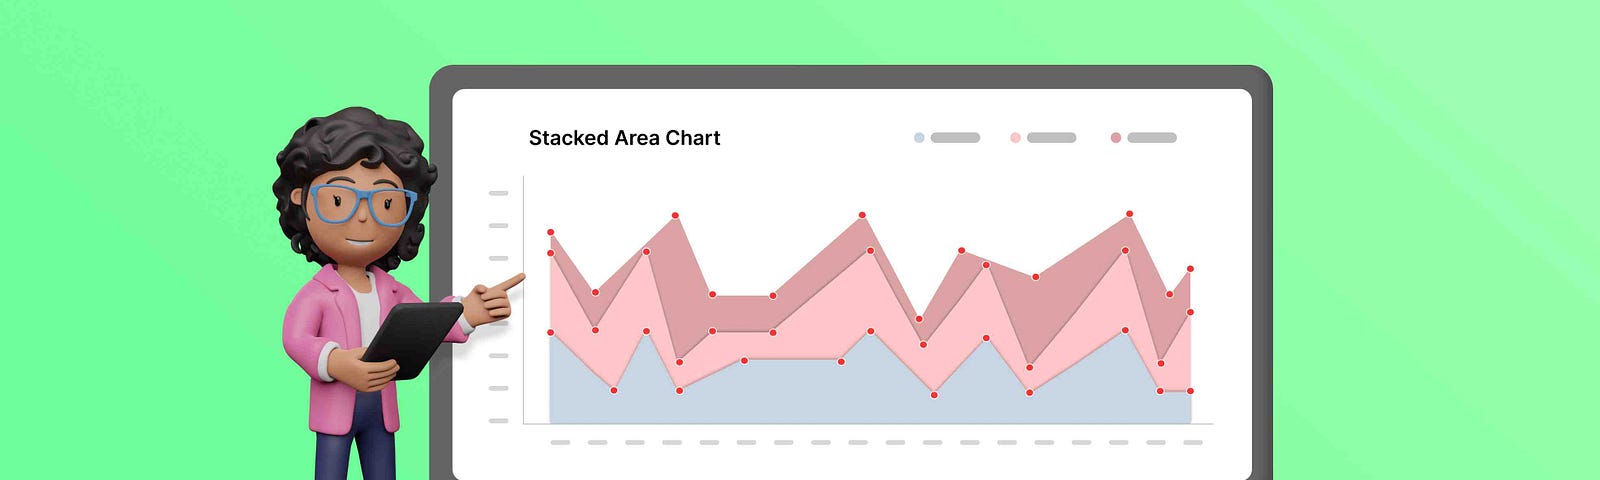 Stacked Area Charts: One Key to Visual Insights